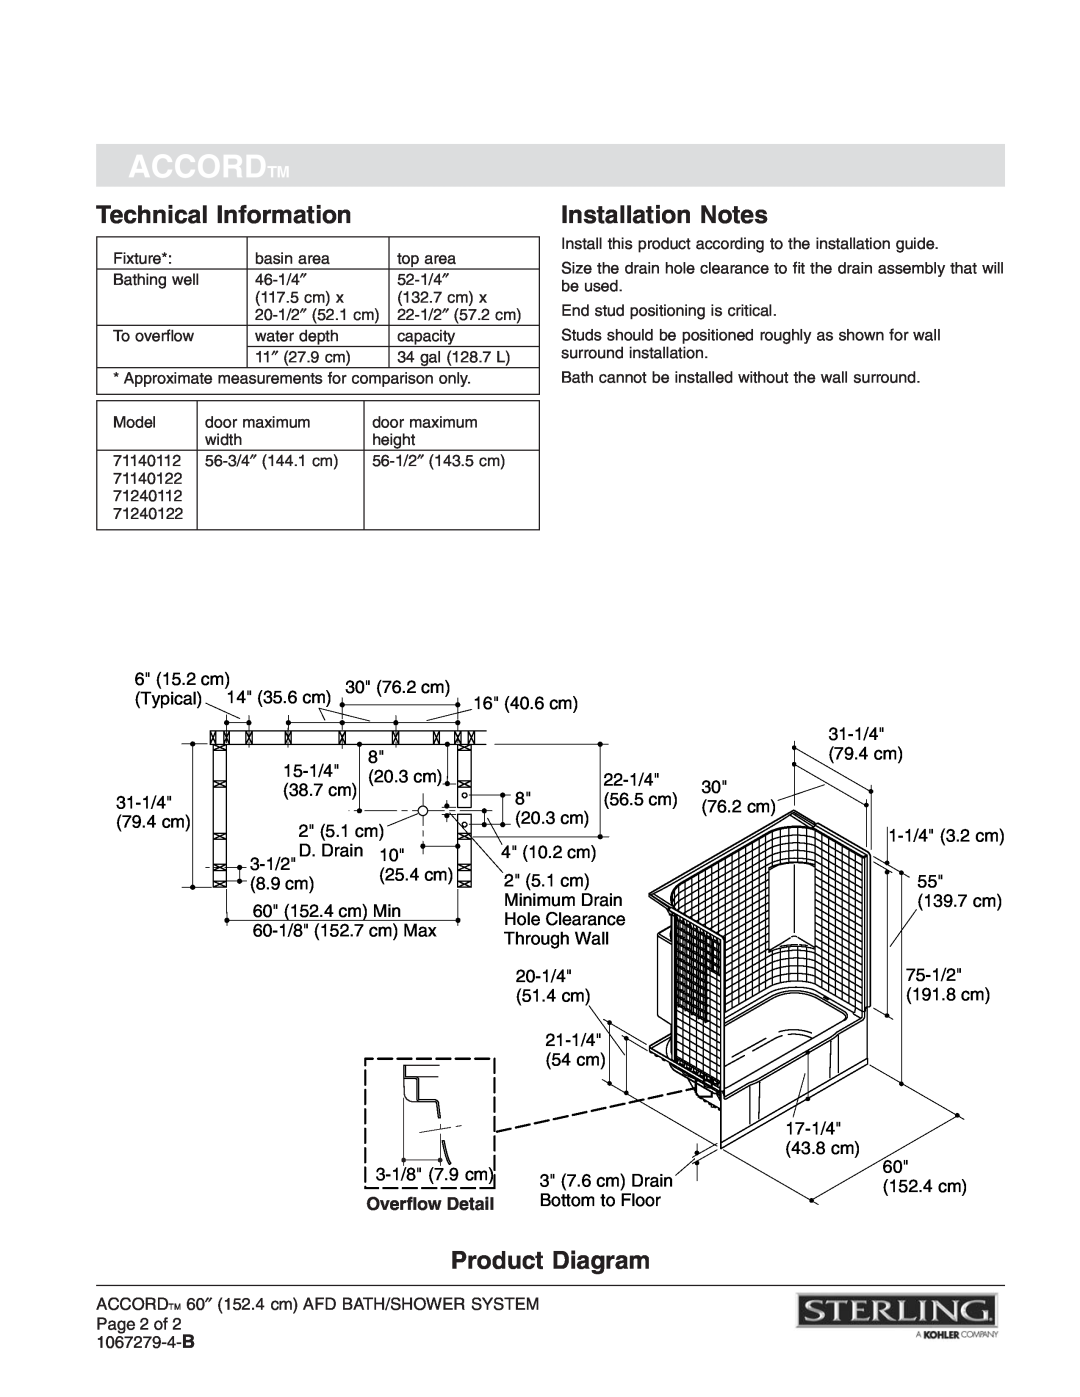 Sterling Plumbing 71140122, 71240122 Technical Information, Installation Notes, Product Diagram, Accordtm, Overflow Detail 